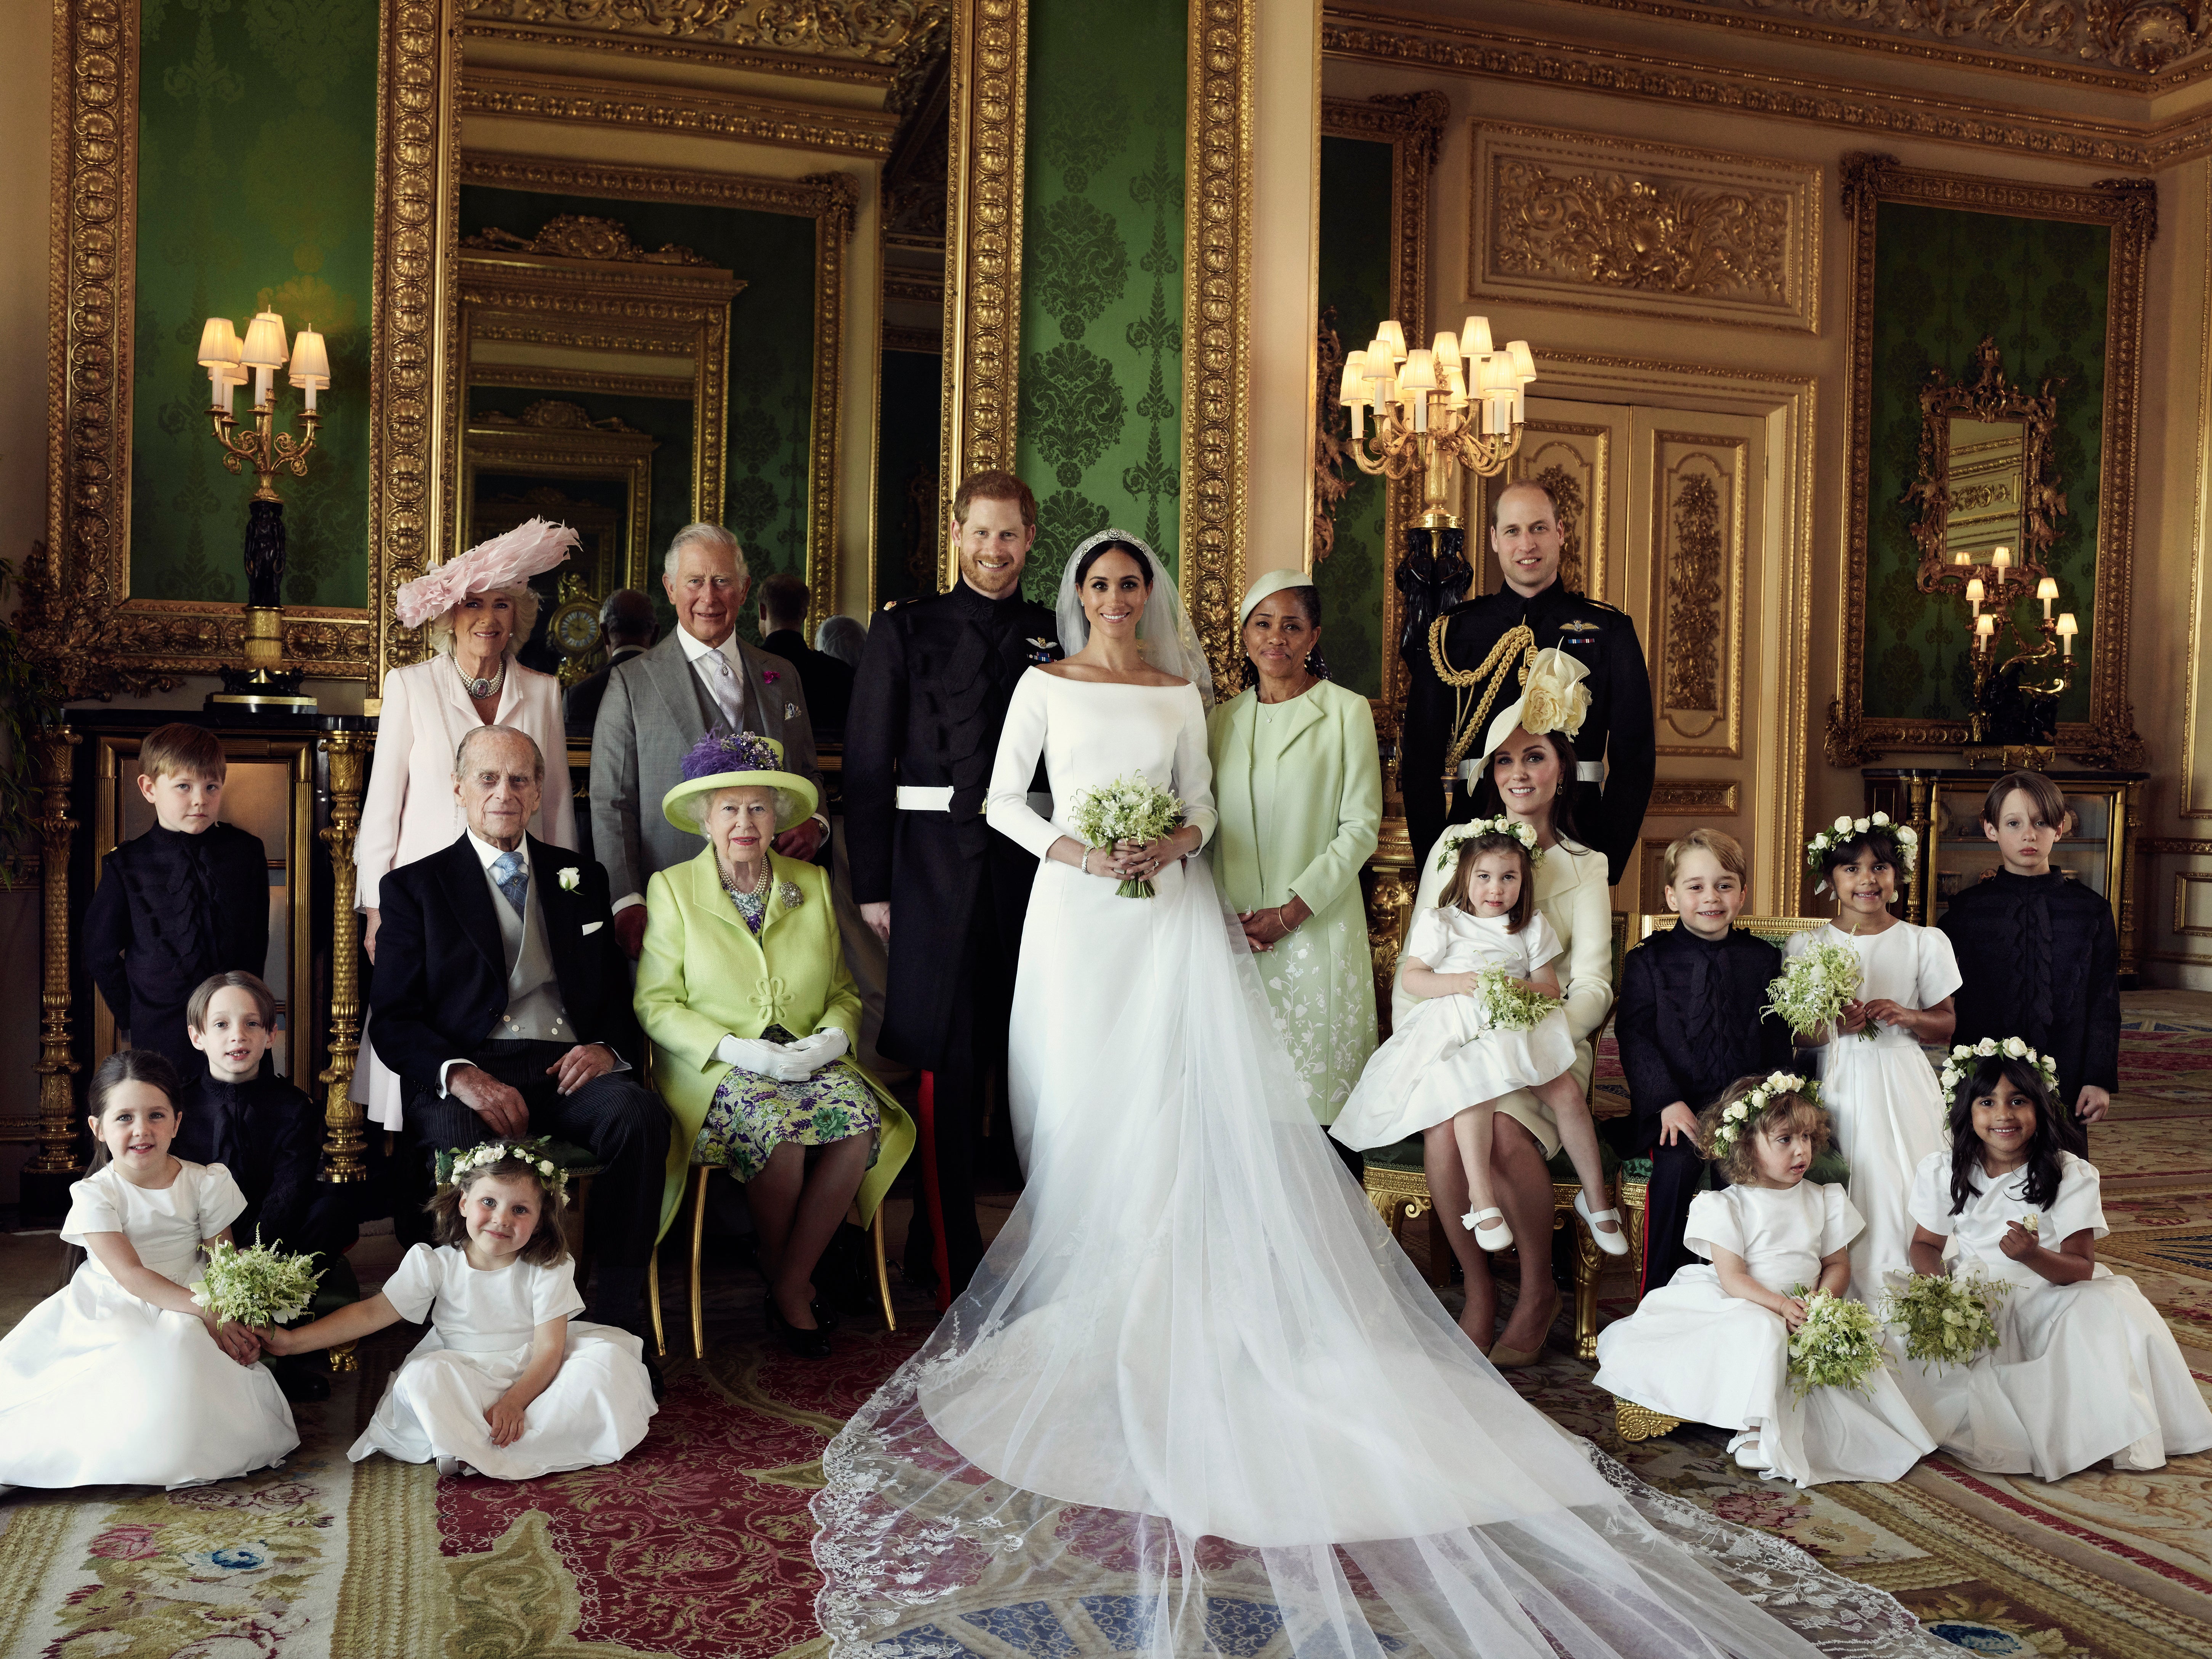 The Official Royal Wedding Photos Are Here, and Of Course Meghan Markle Is A Vision
